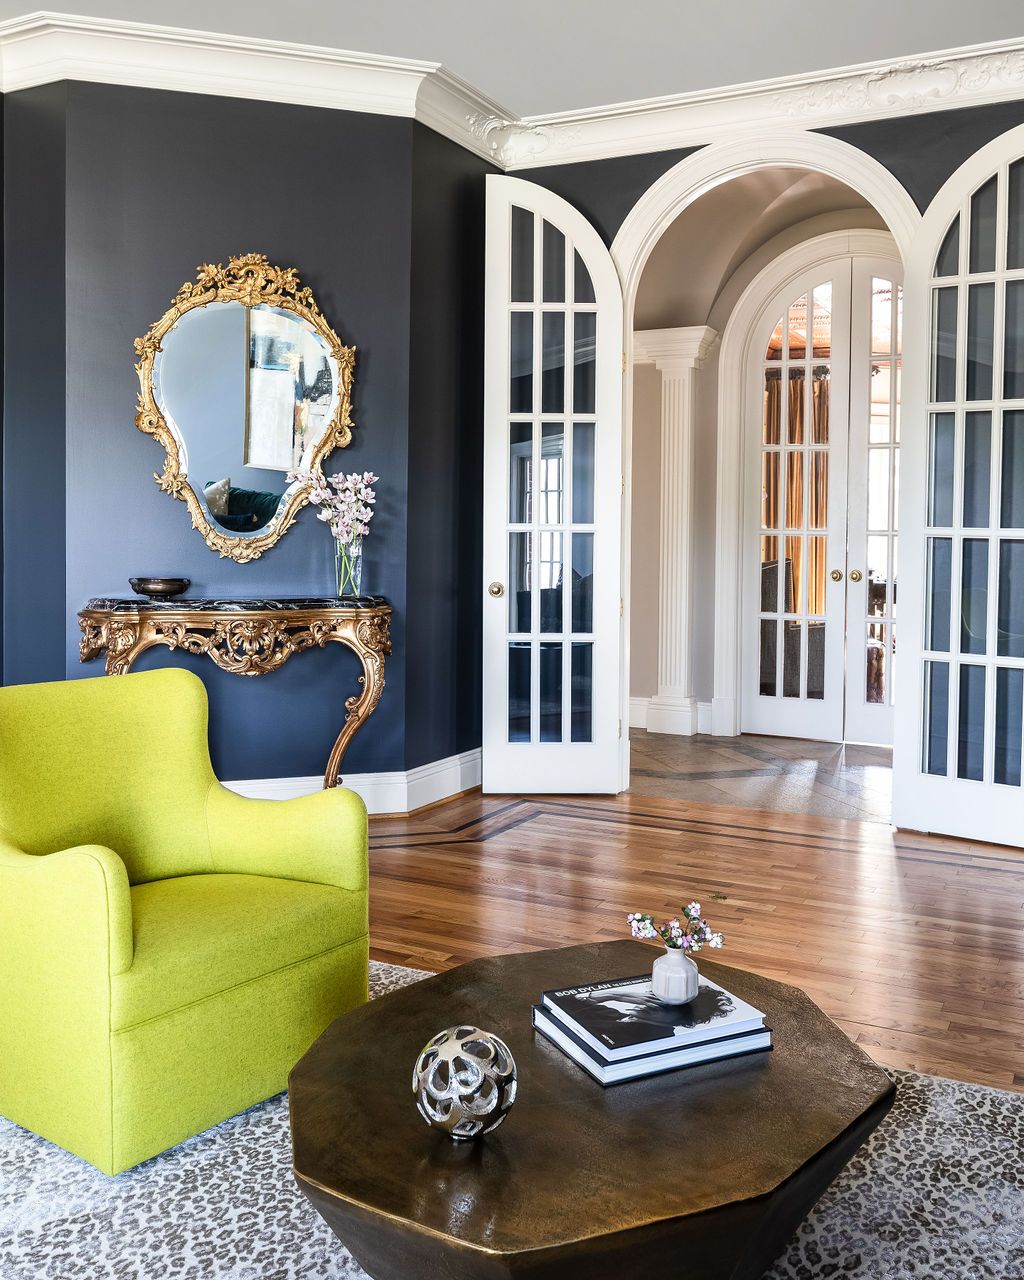 arched-doors-ornate-mirror-leopard-rug